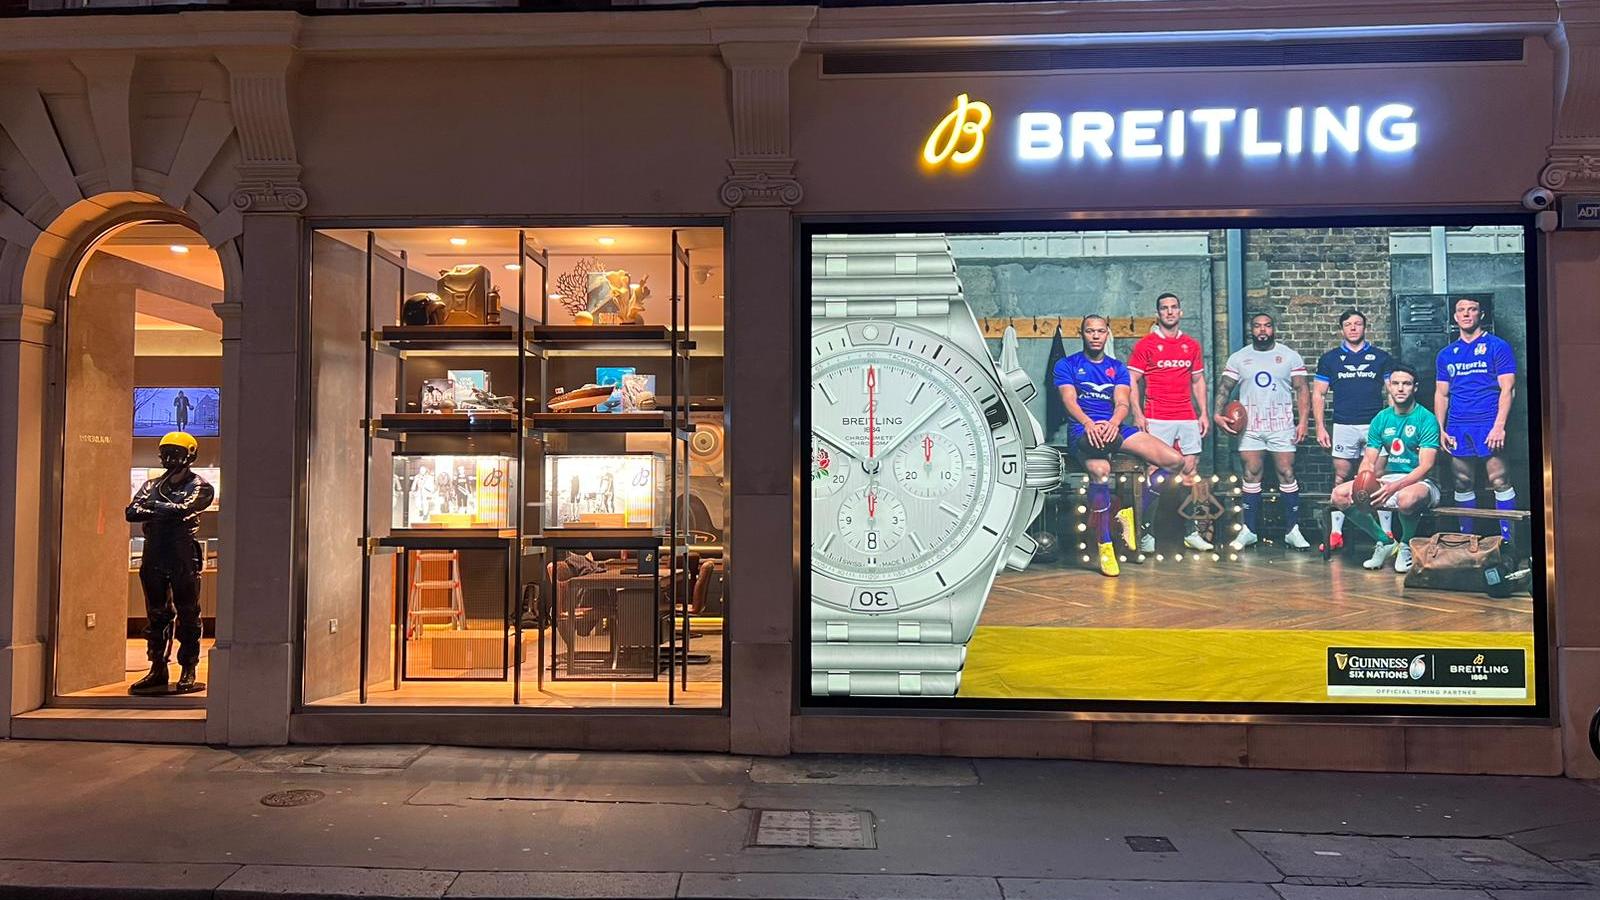 Breitling Window Graphics for rugby world cup